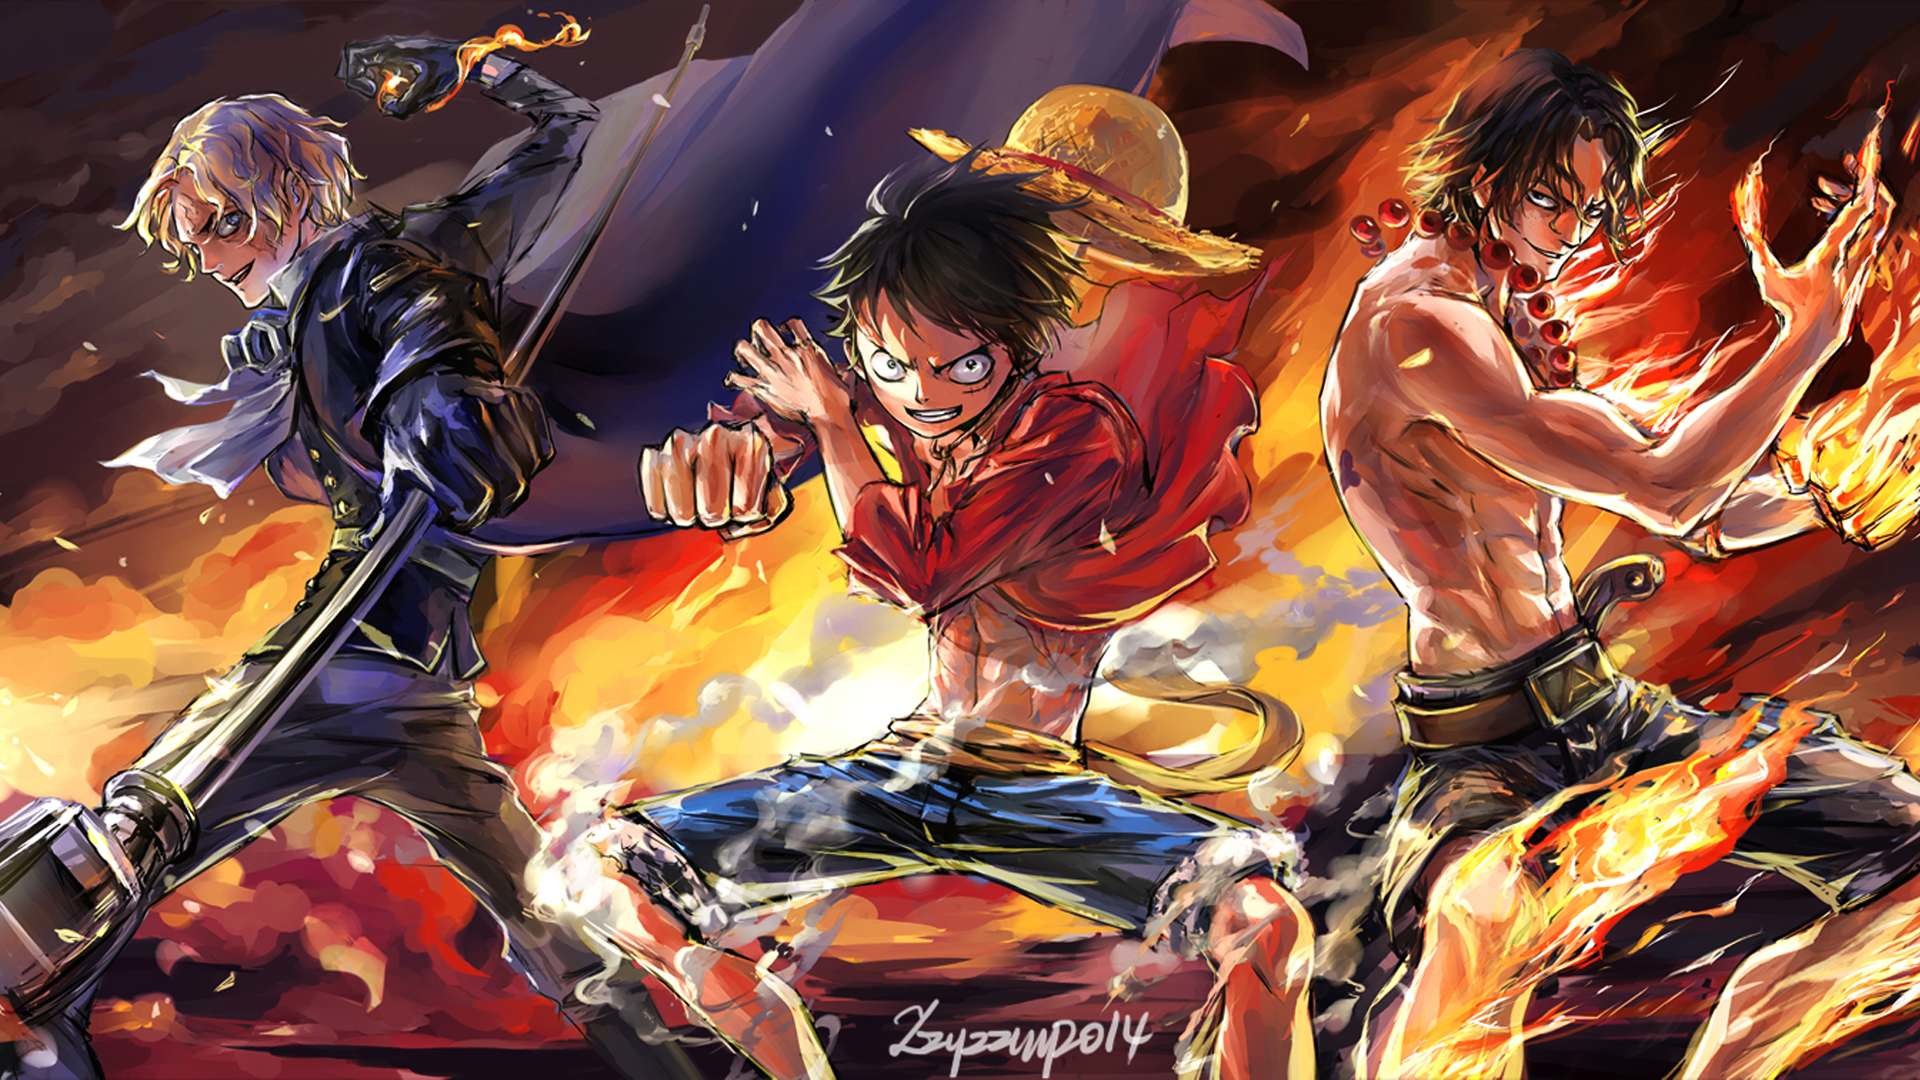 1920x1080 One Piece New World Sabo Wallpapers 10567 - HD Wallpapers Site | Download  Wallpaper | Pinterest | World, Wallpapers and One piece